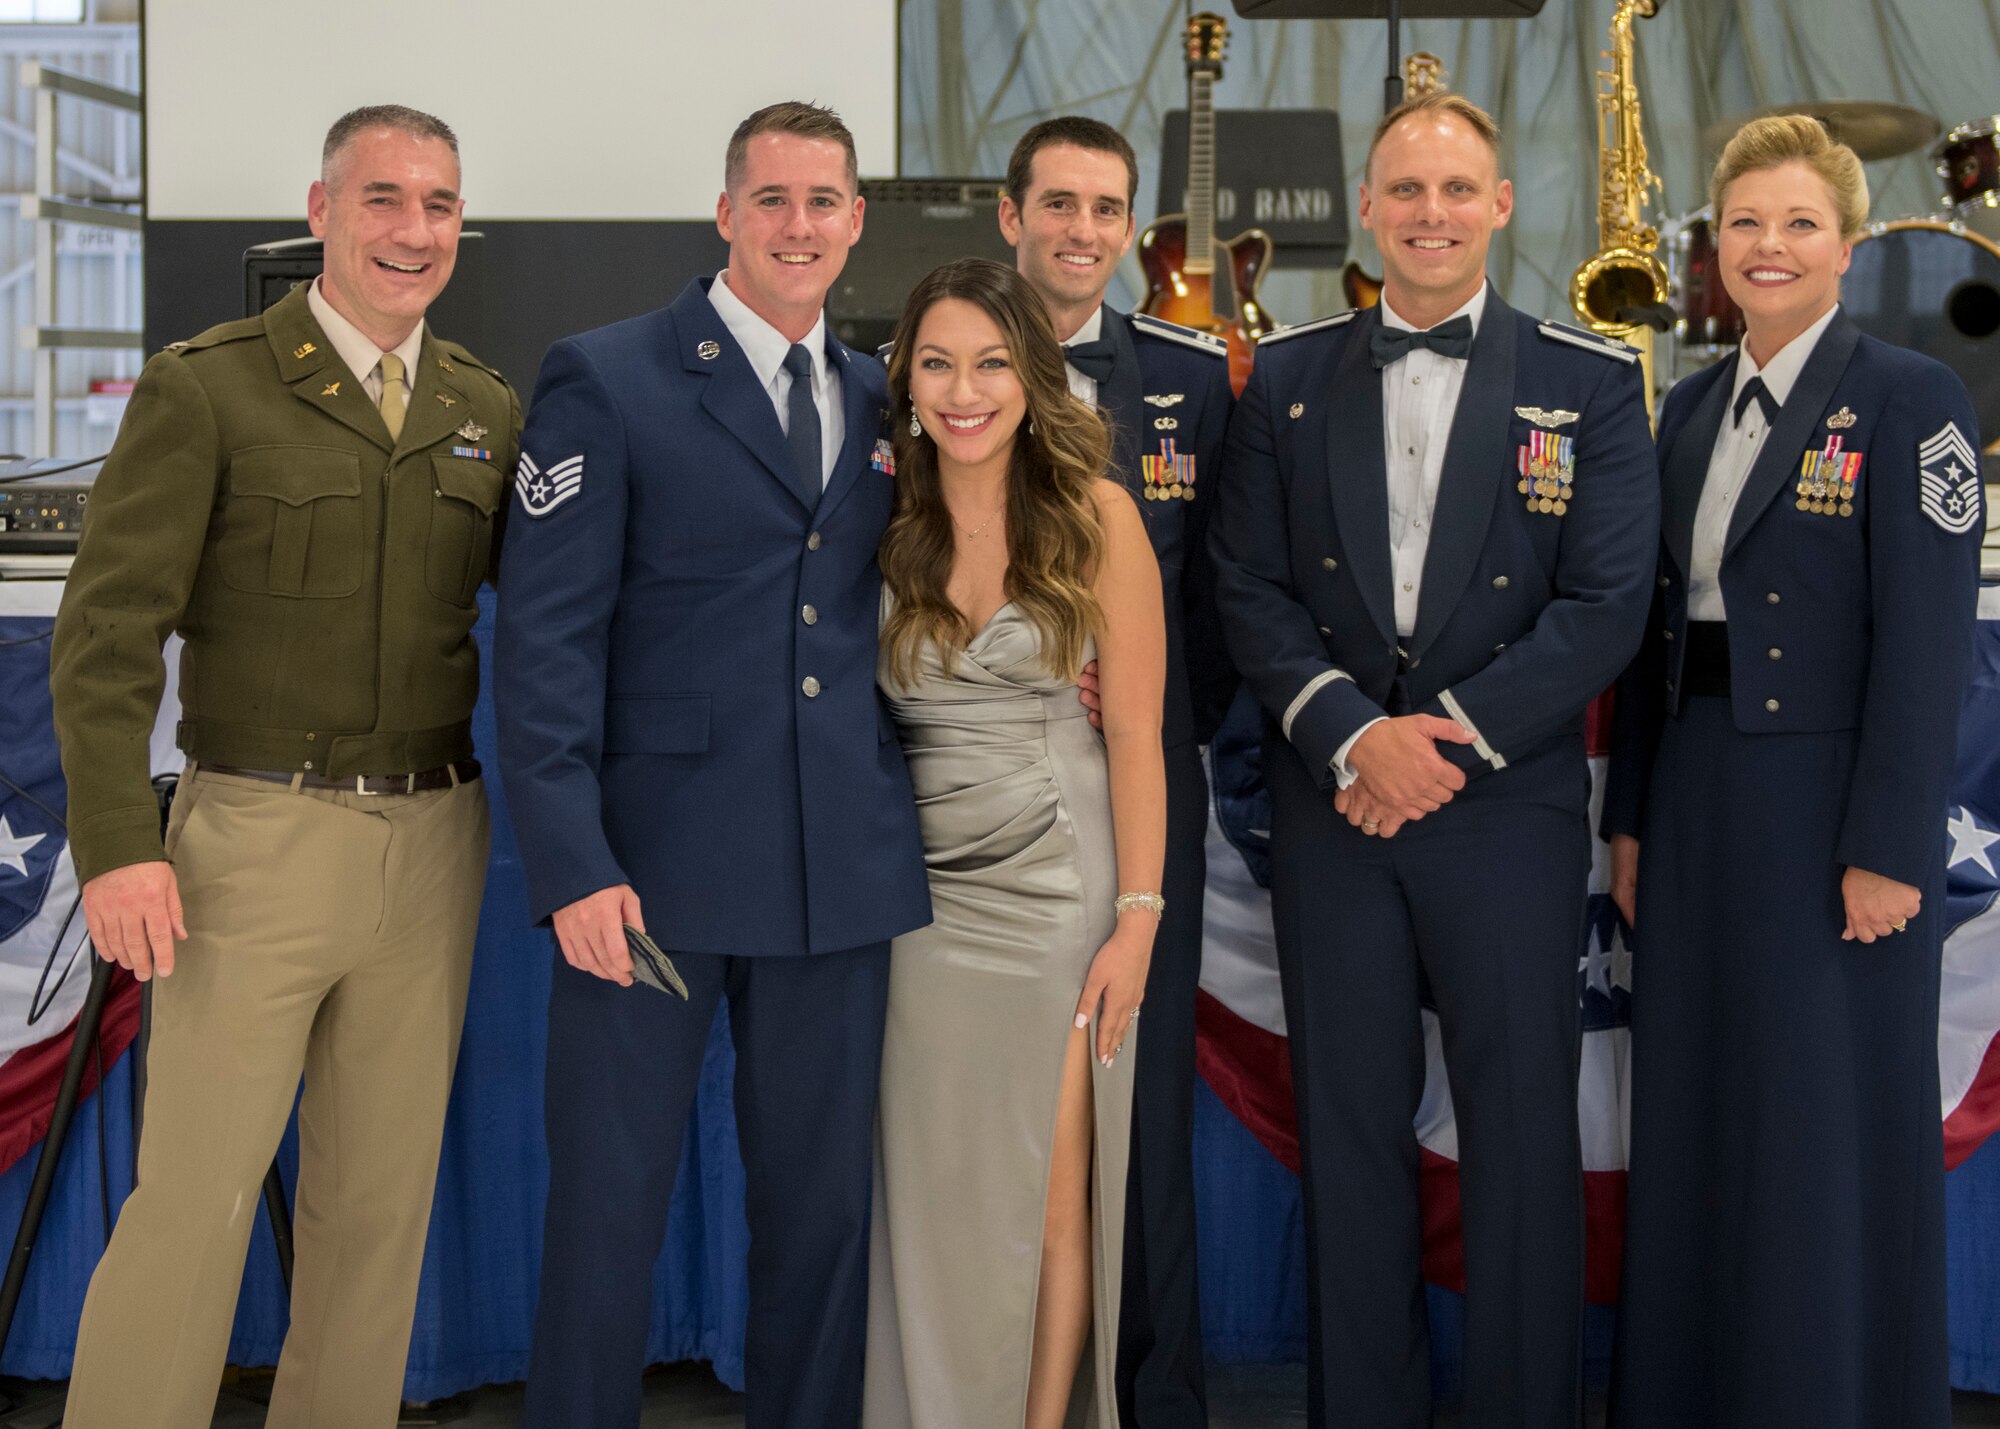 Newly promoted Tech. Sgt. Kyle Saxon, 54th Operations Support Squadron operations flight chief, poses for a photo with his spouse and base leadership at the Air Force Ball, Sept. 14, 2019, on Holloman Air Force Base, N.M. Saxon promoted from staff sergeant to technical sergeant through the Stripes for Exceptional Performers program. (U.S. Air Force photo by Airman 1st Class Kindra Stewart)